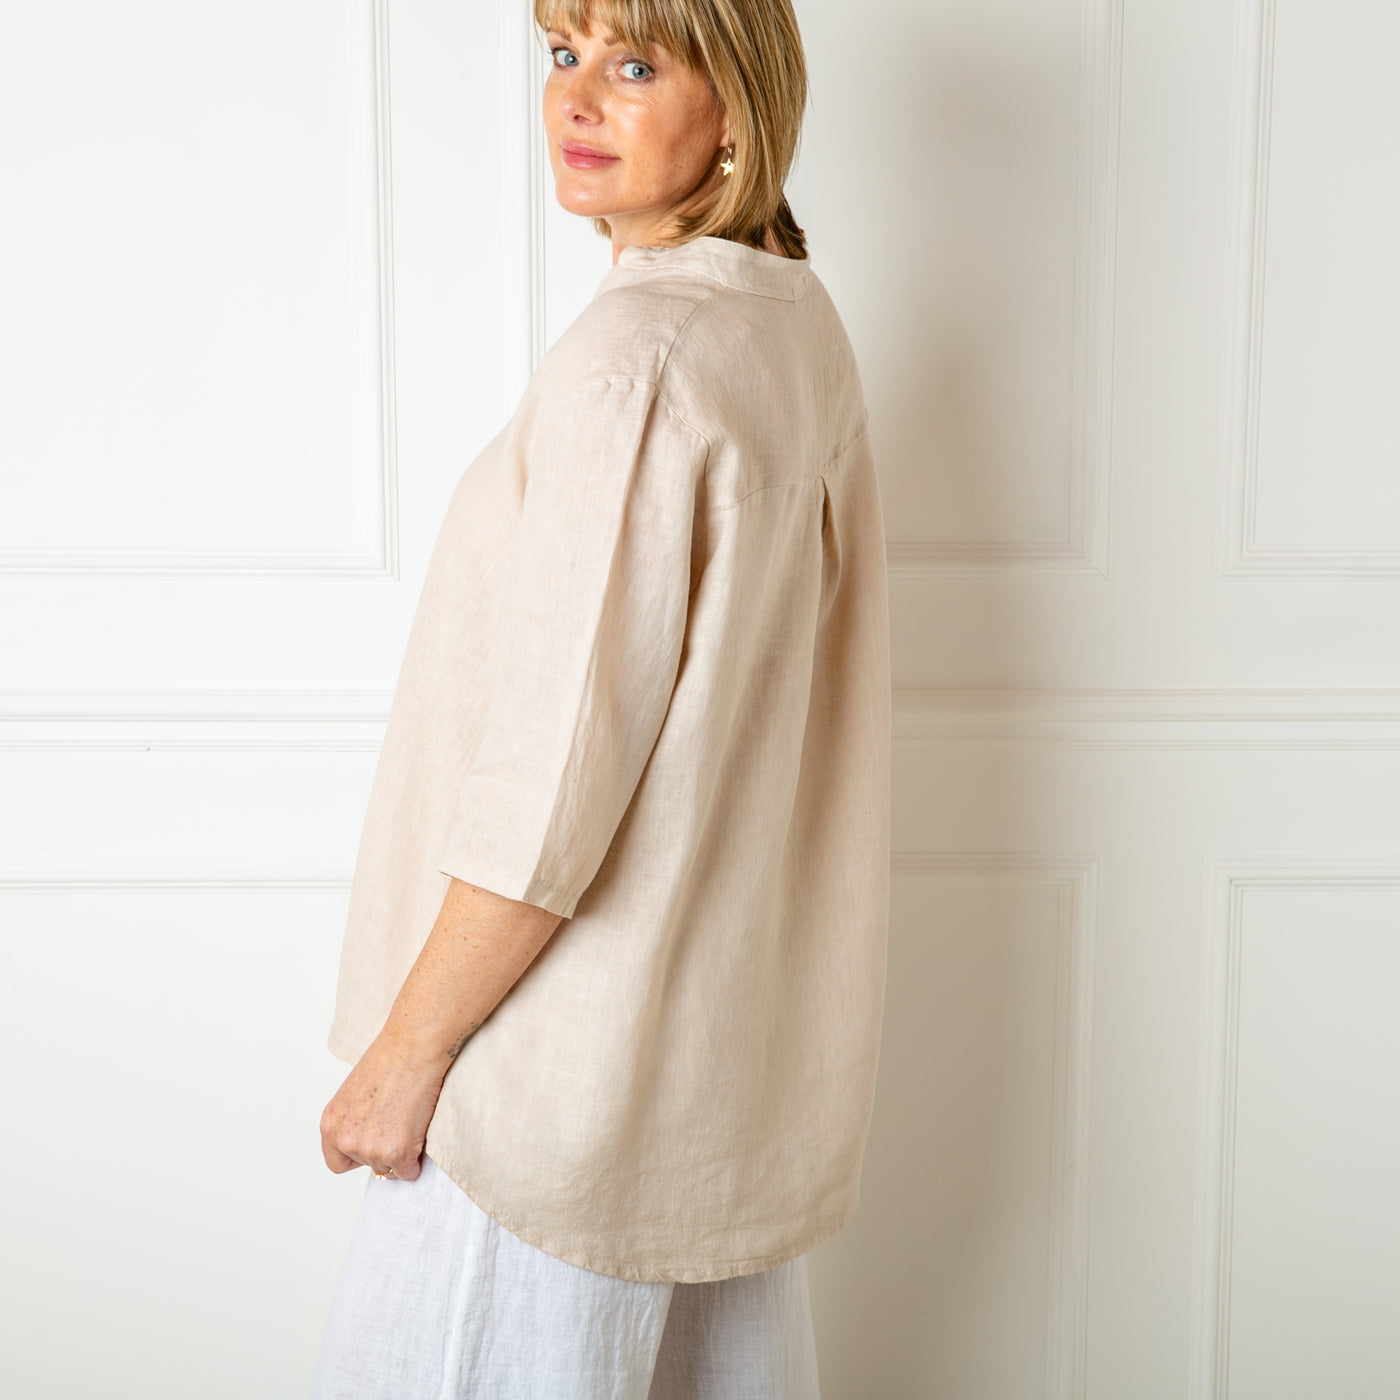 The Linen Tunic Top in natural cream stone made from 100% linen for a lightweight summer look